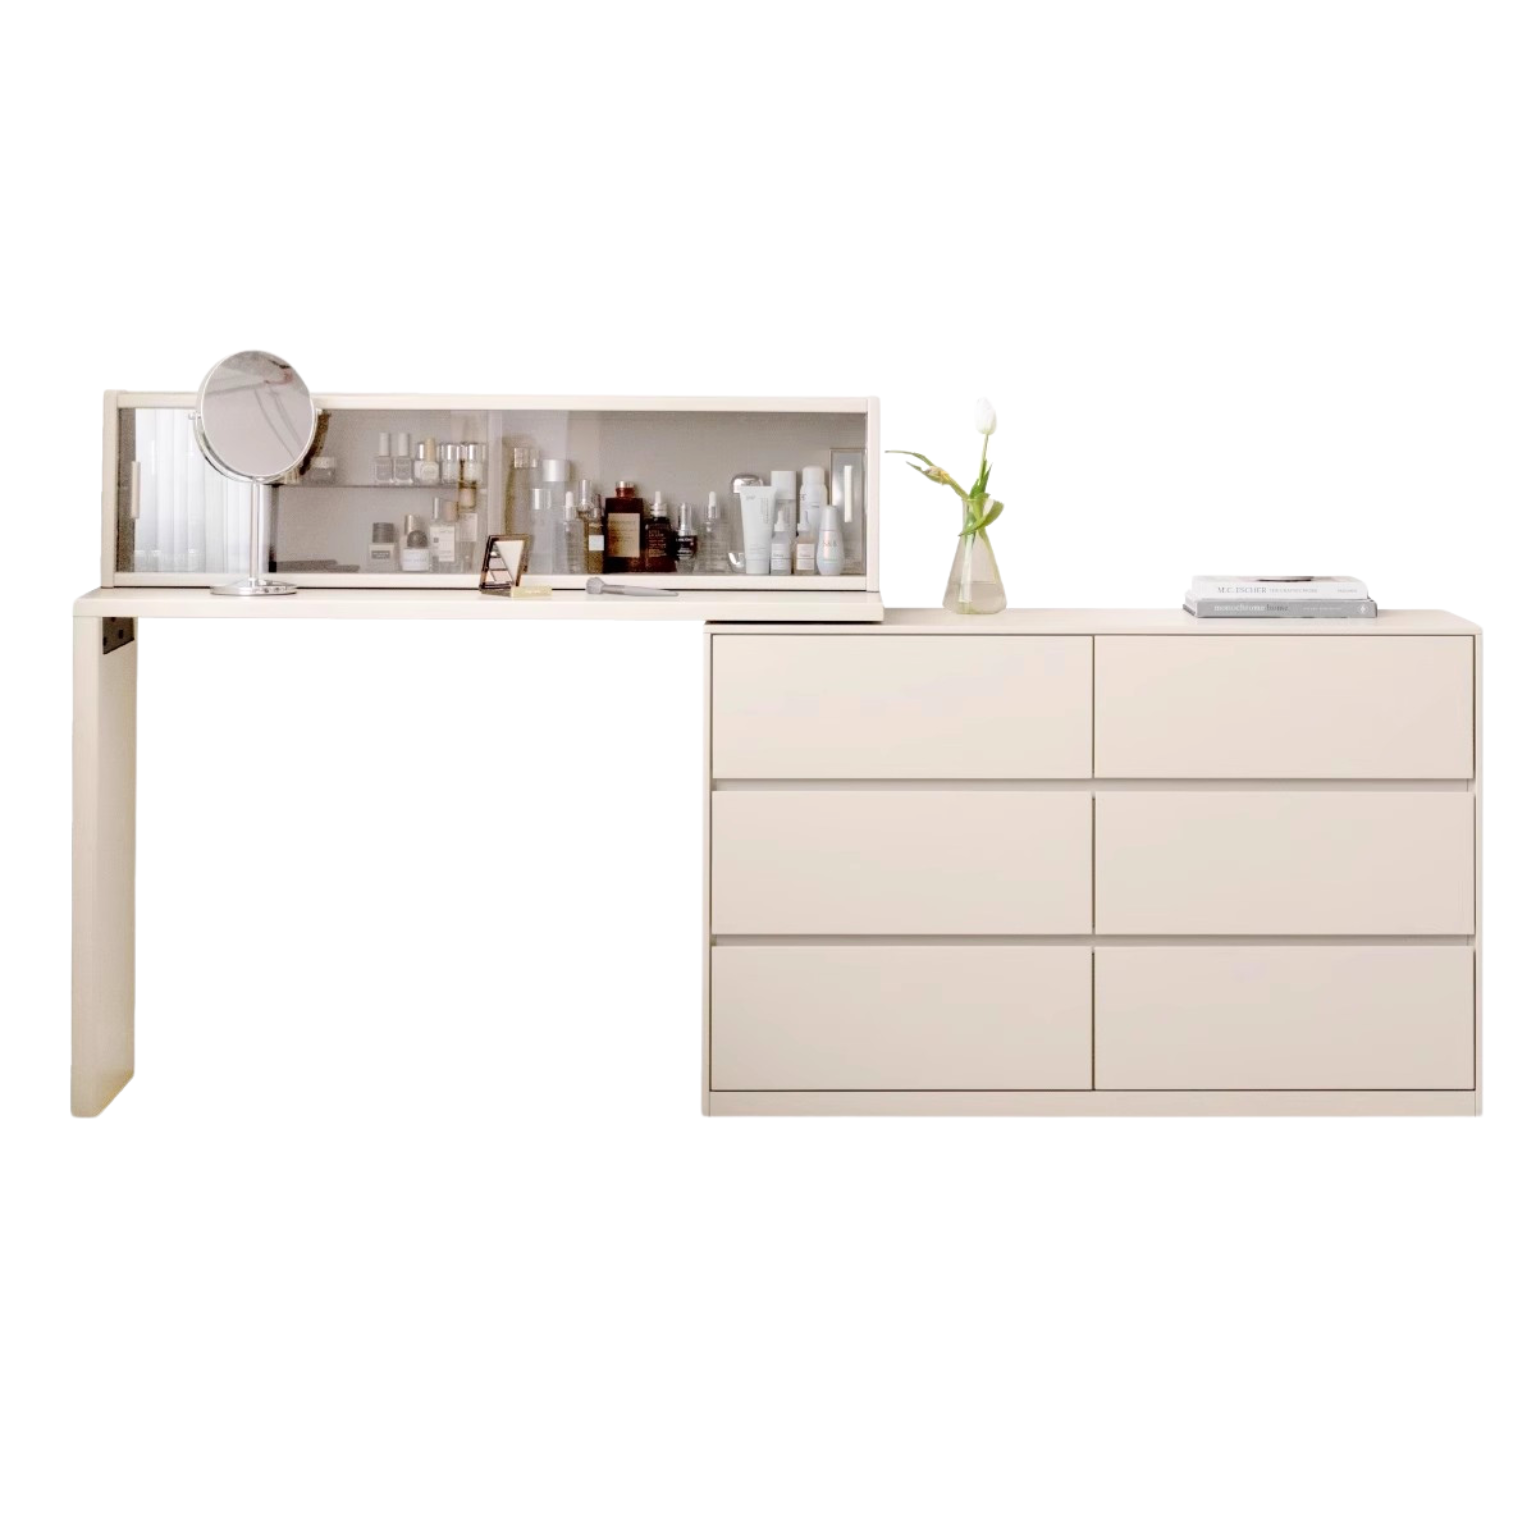 Poplar solid wood dressing table cream style integrated simple drawer-